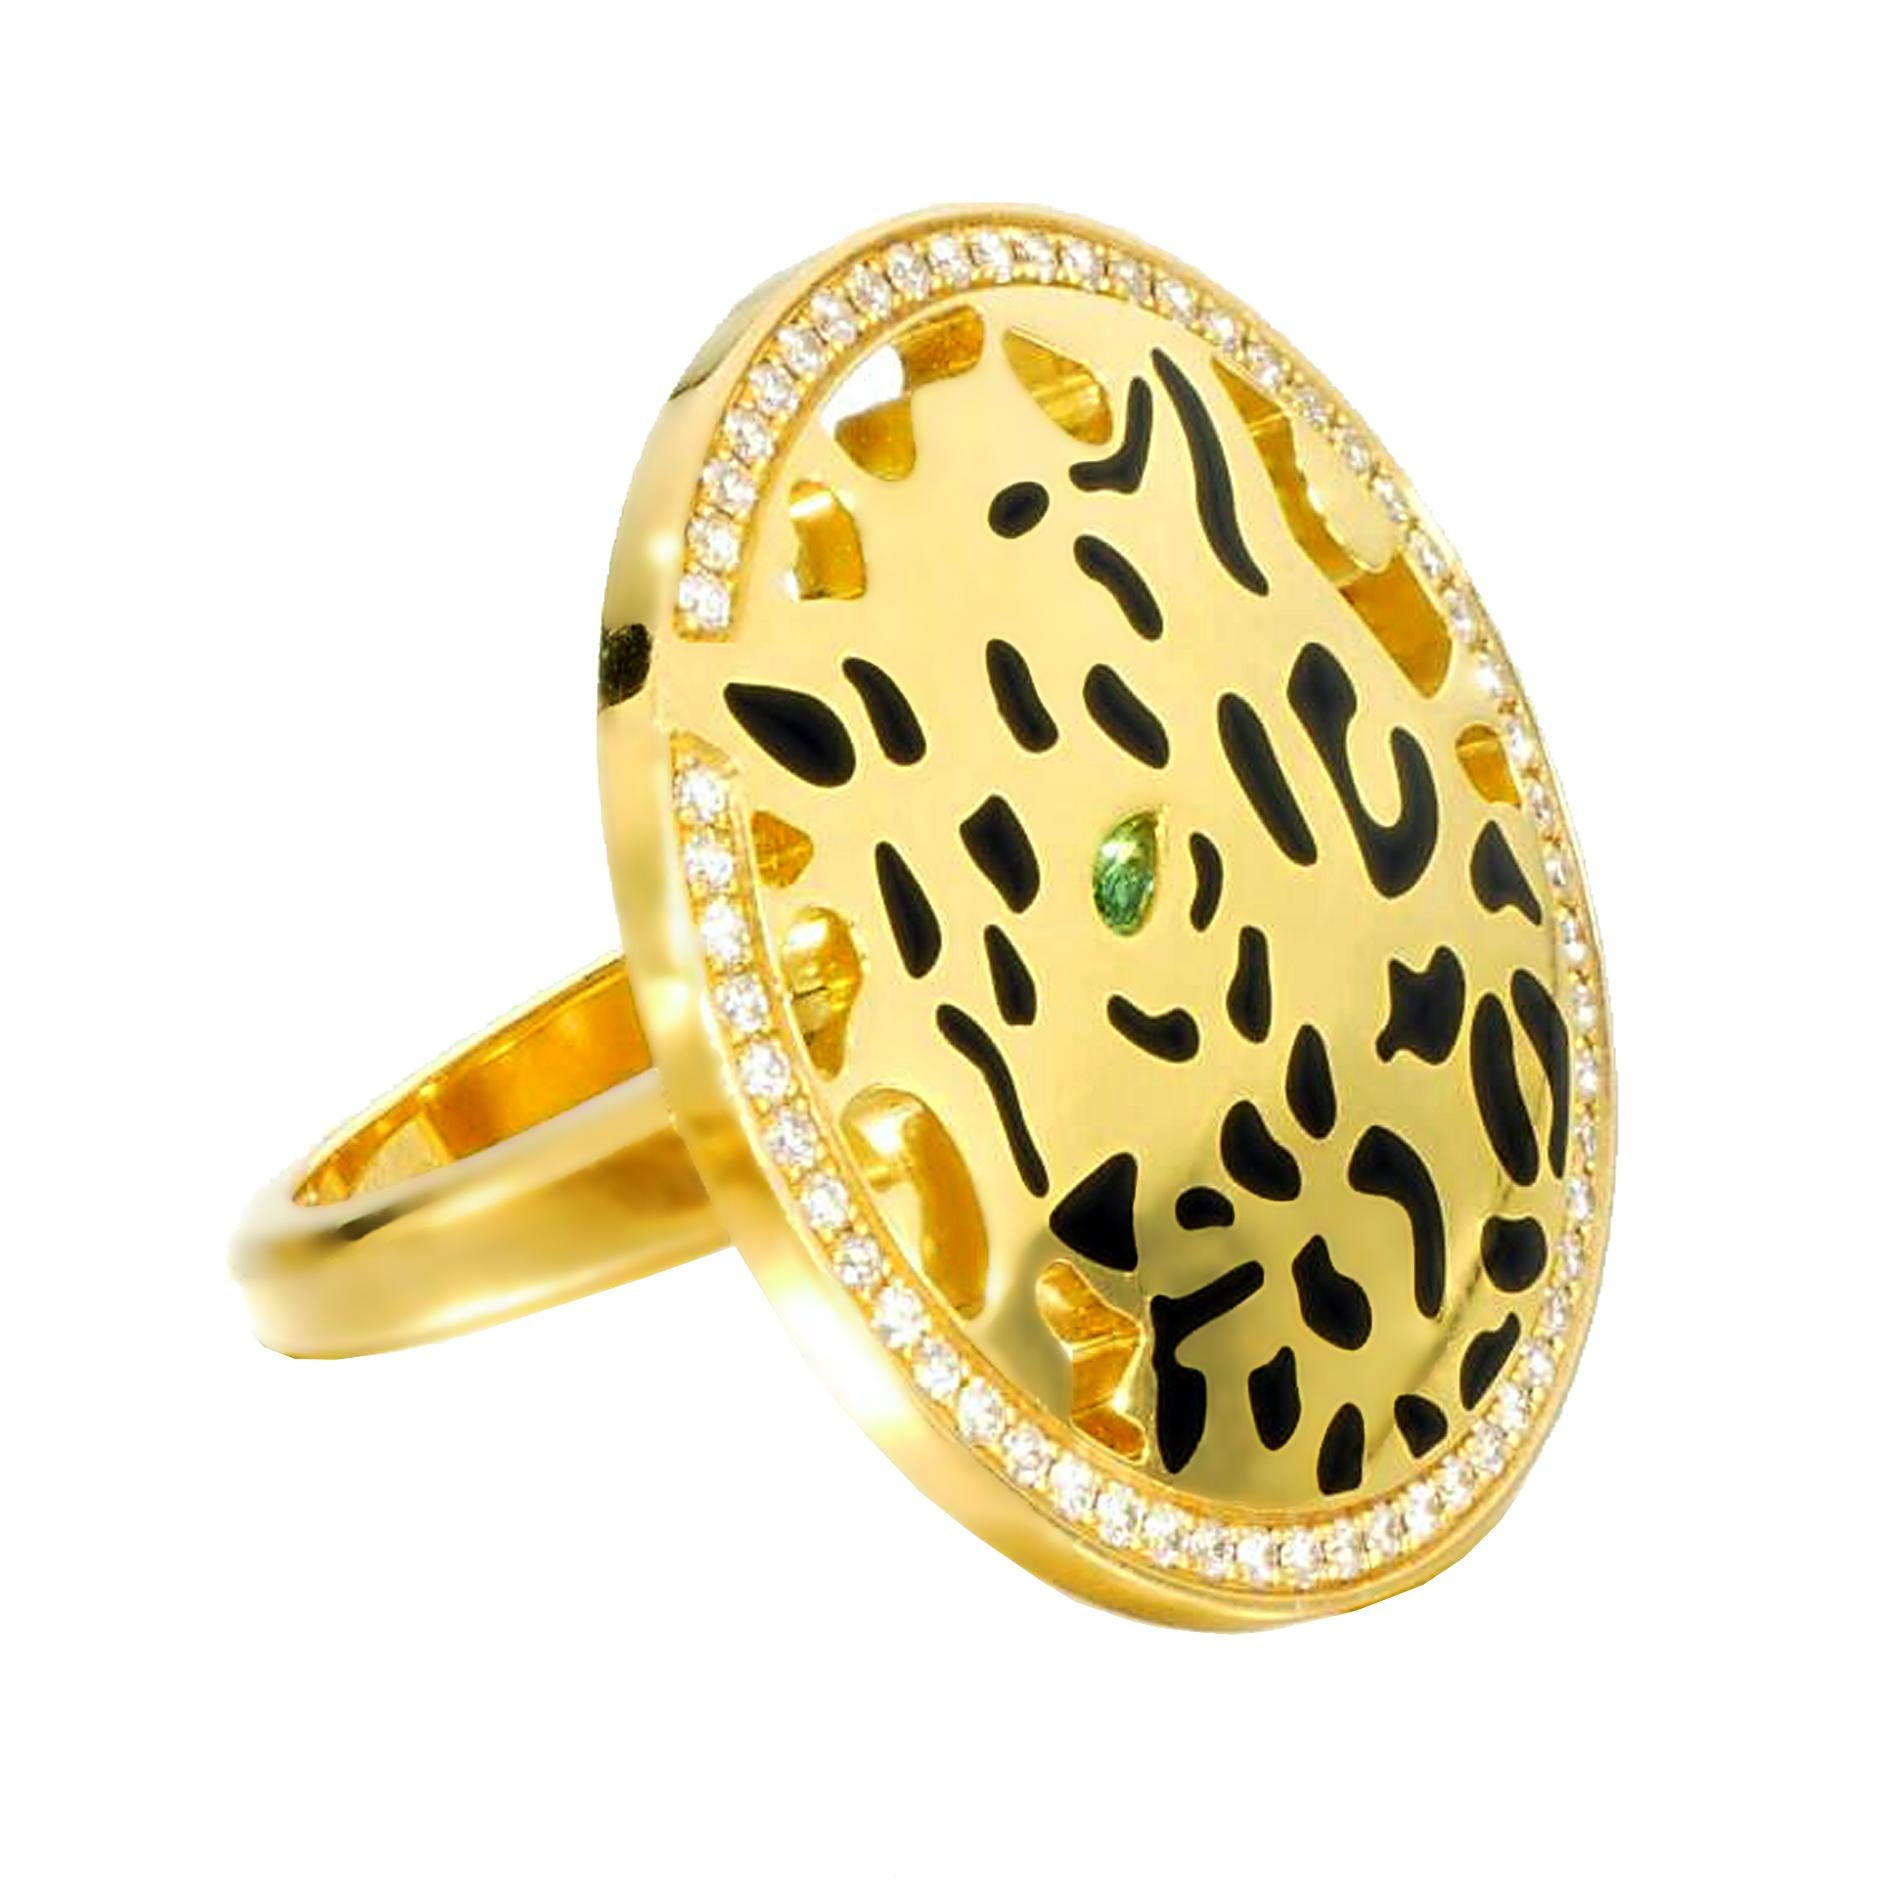 Round Cut Cartier Panthere De Cartier Yellow Gold Diamond Ring For Sale